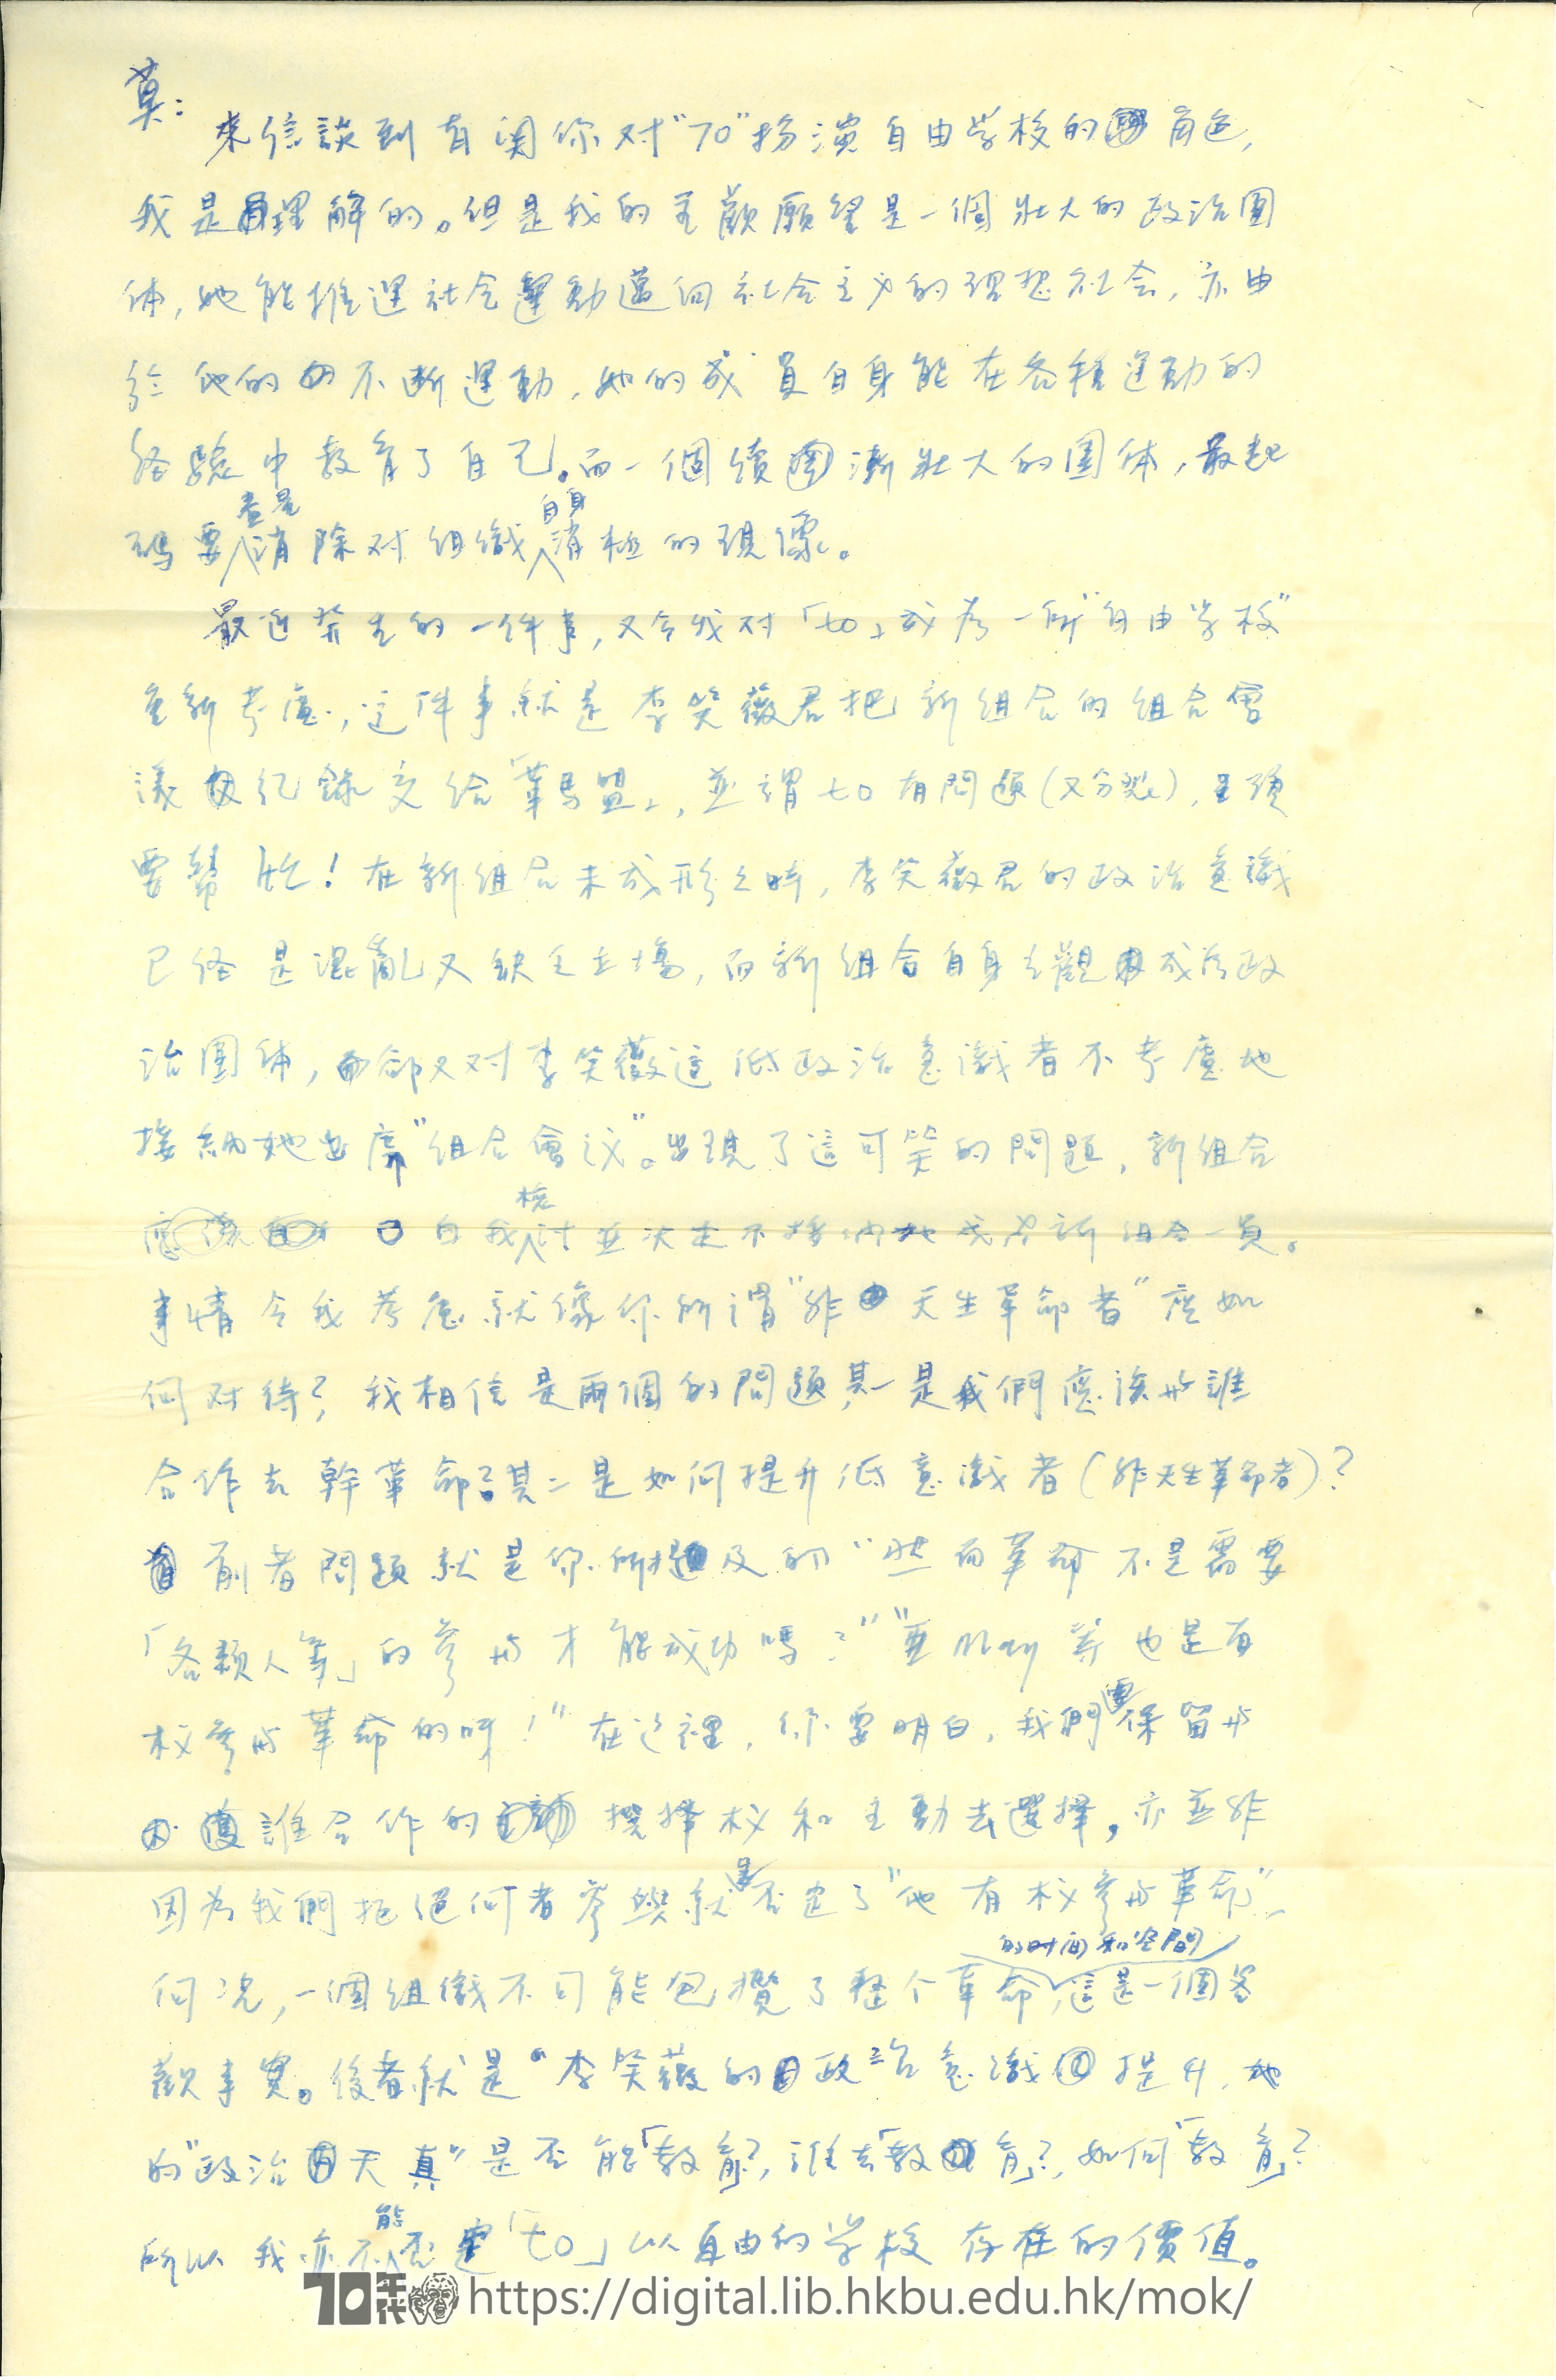   Letter from Tong Shi Hong 湯 